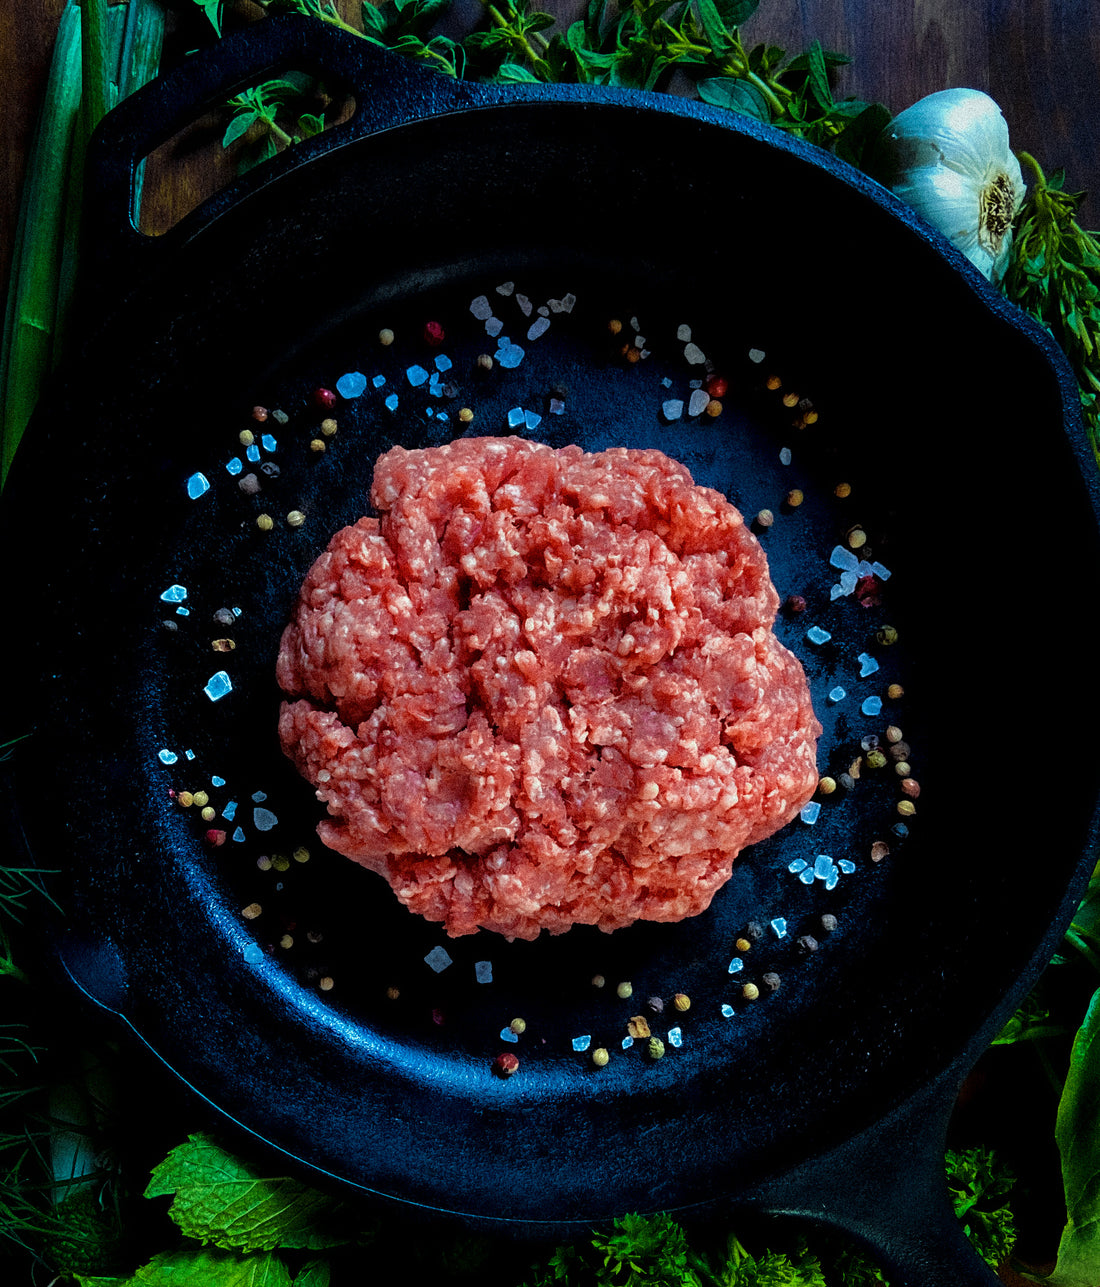 15 Reasons Why Bravo Ground Beef is the BEST